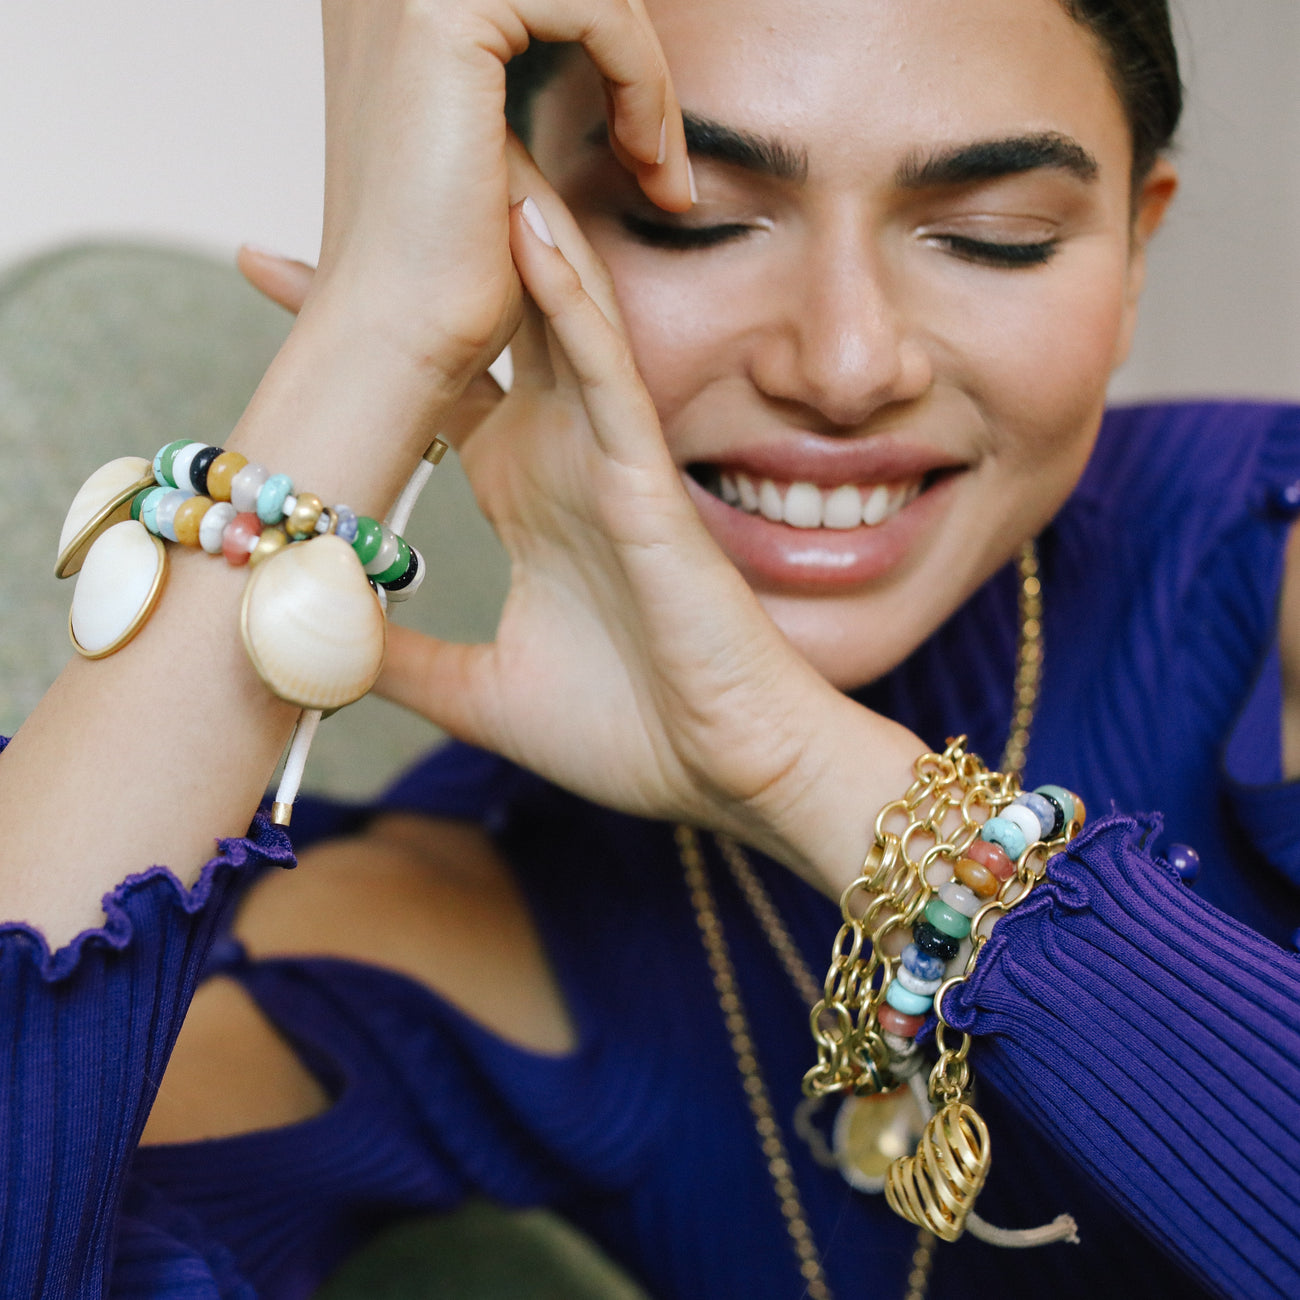 woman in blue shirt with styled jewelry, beads, gold